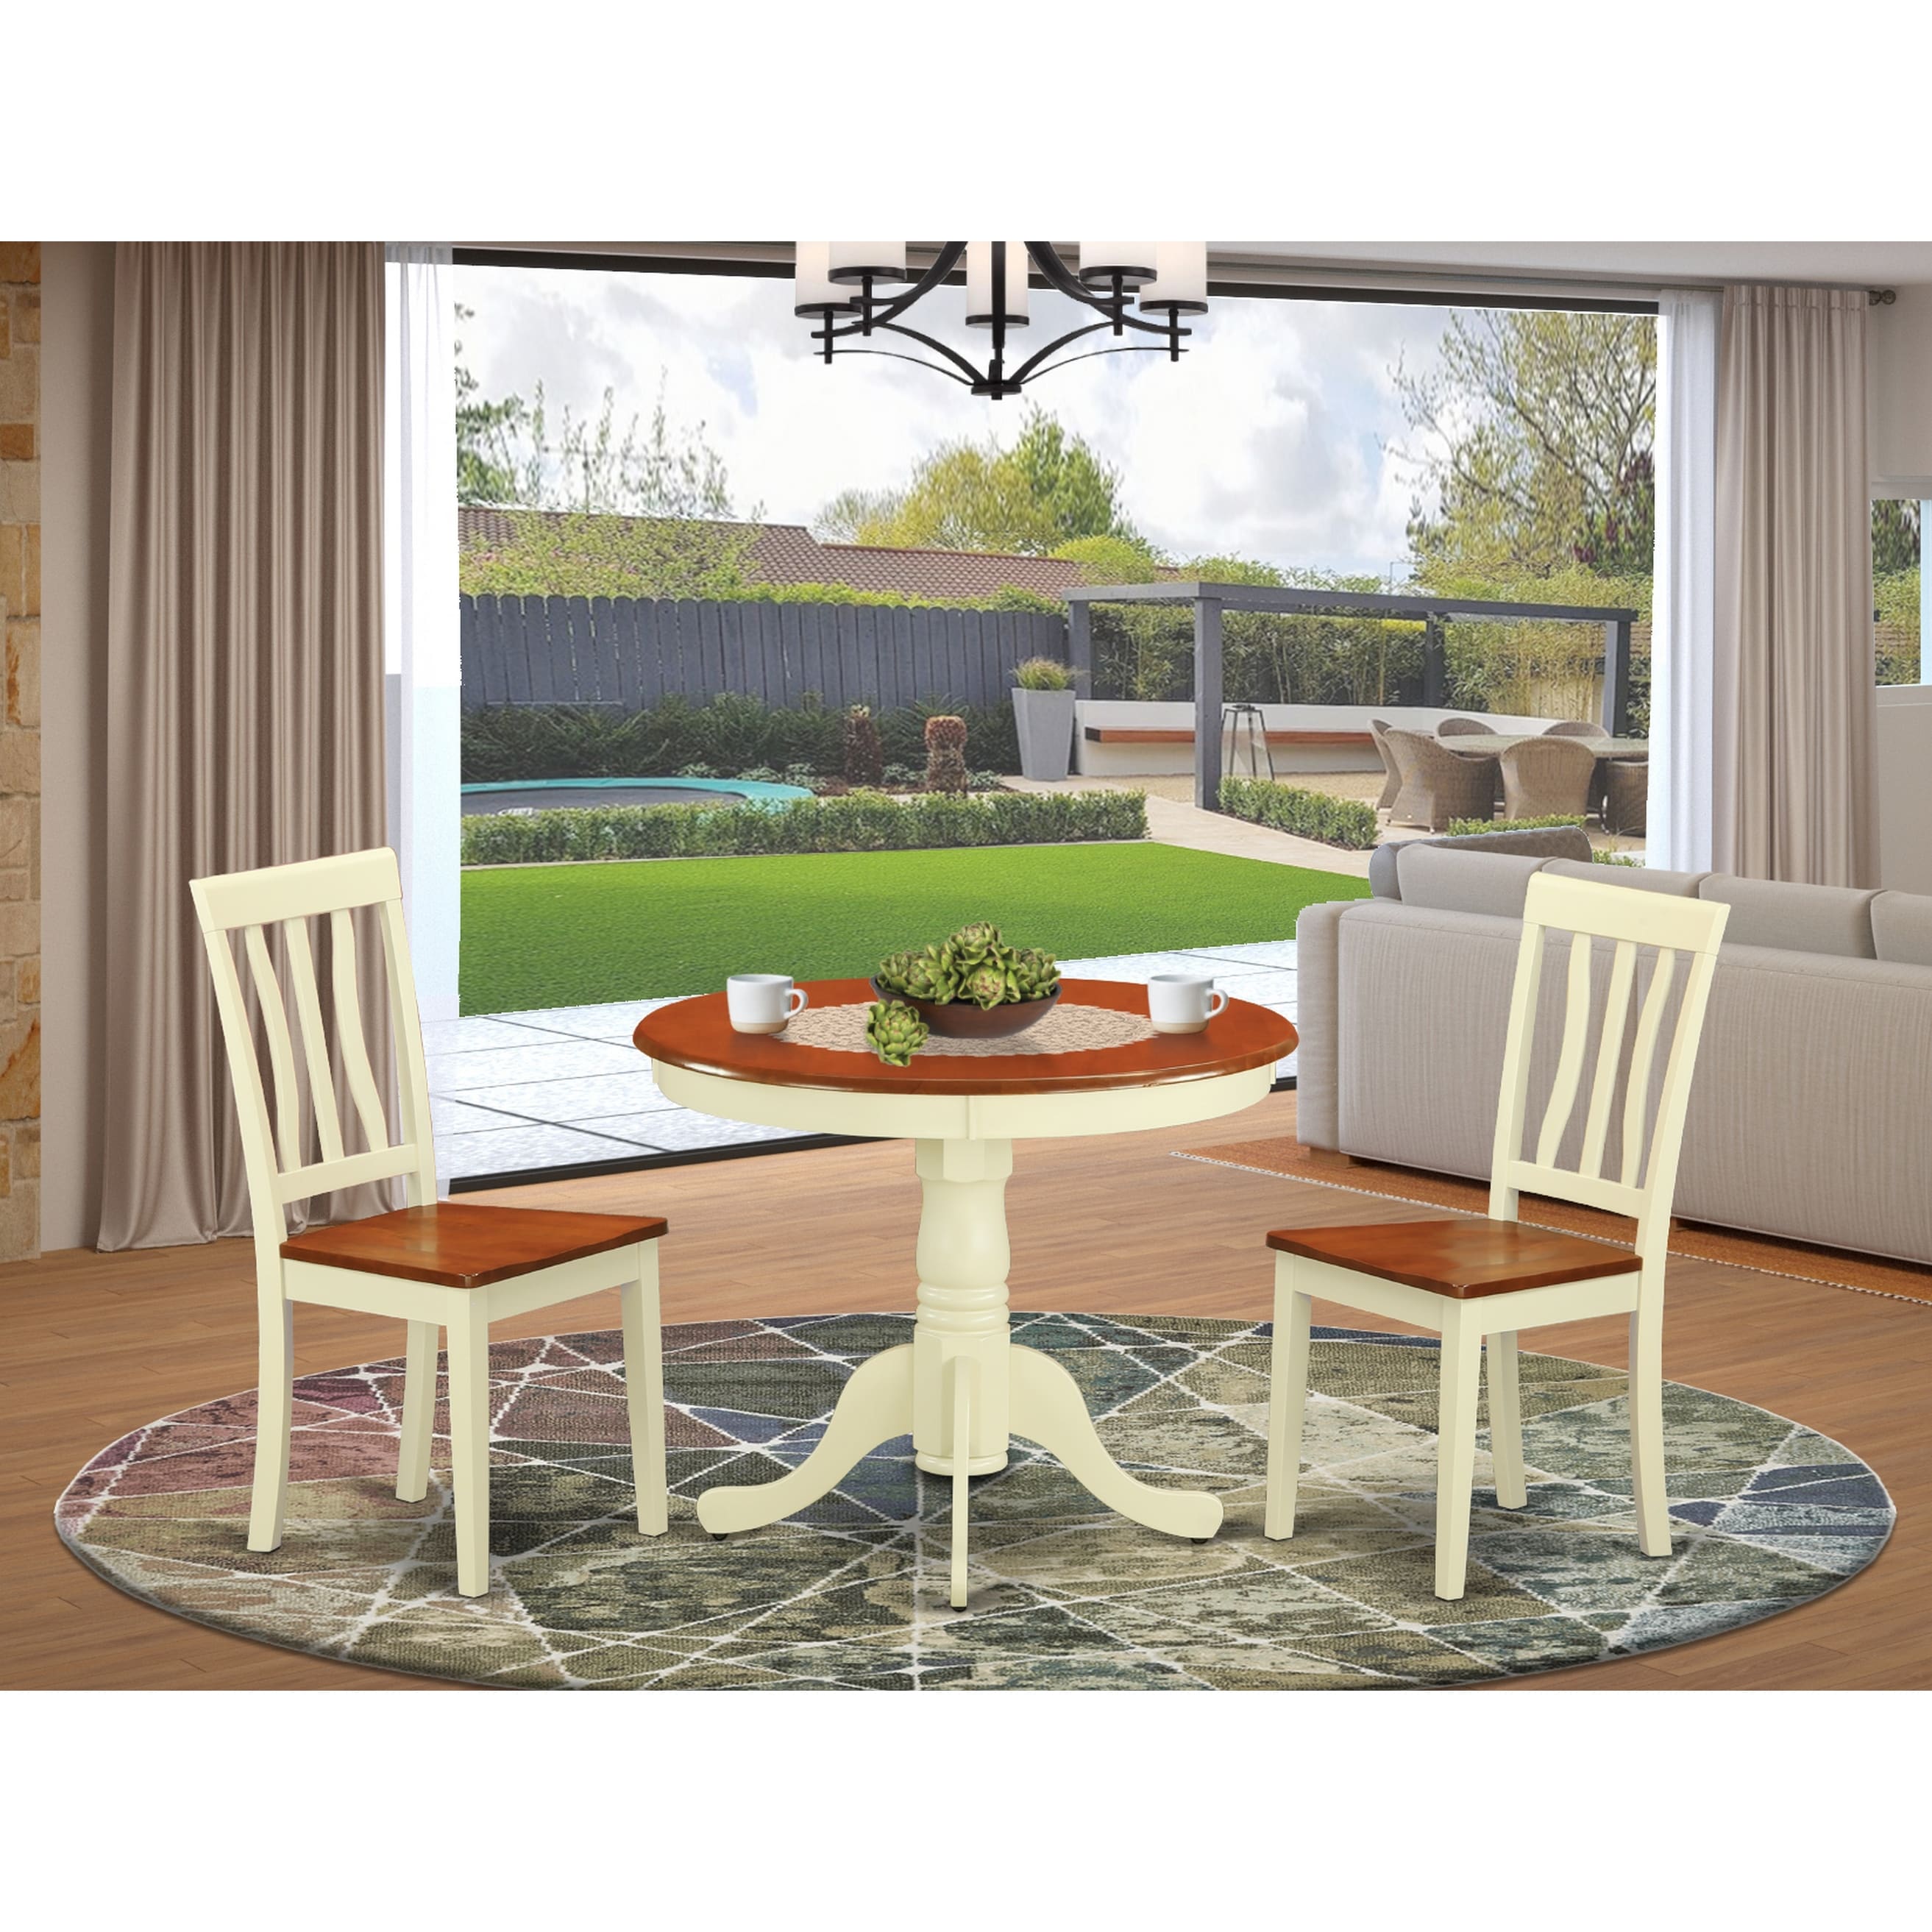 Buttermilk And Cherry Kitchen Table And Two Chair 3 Piece Dining Set Overstock 10201217